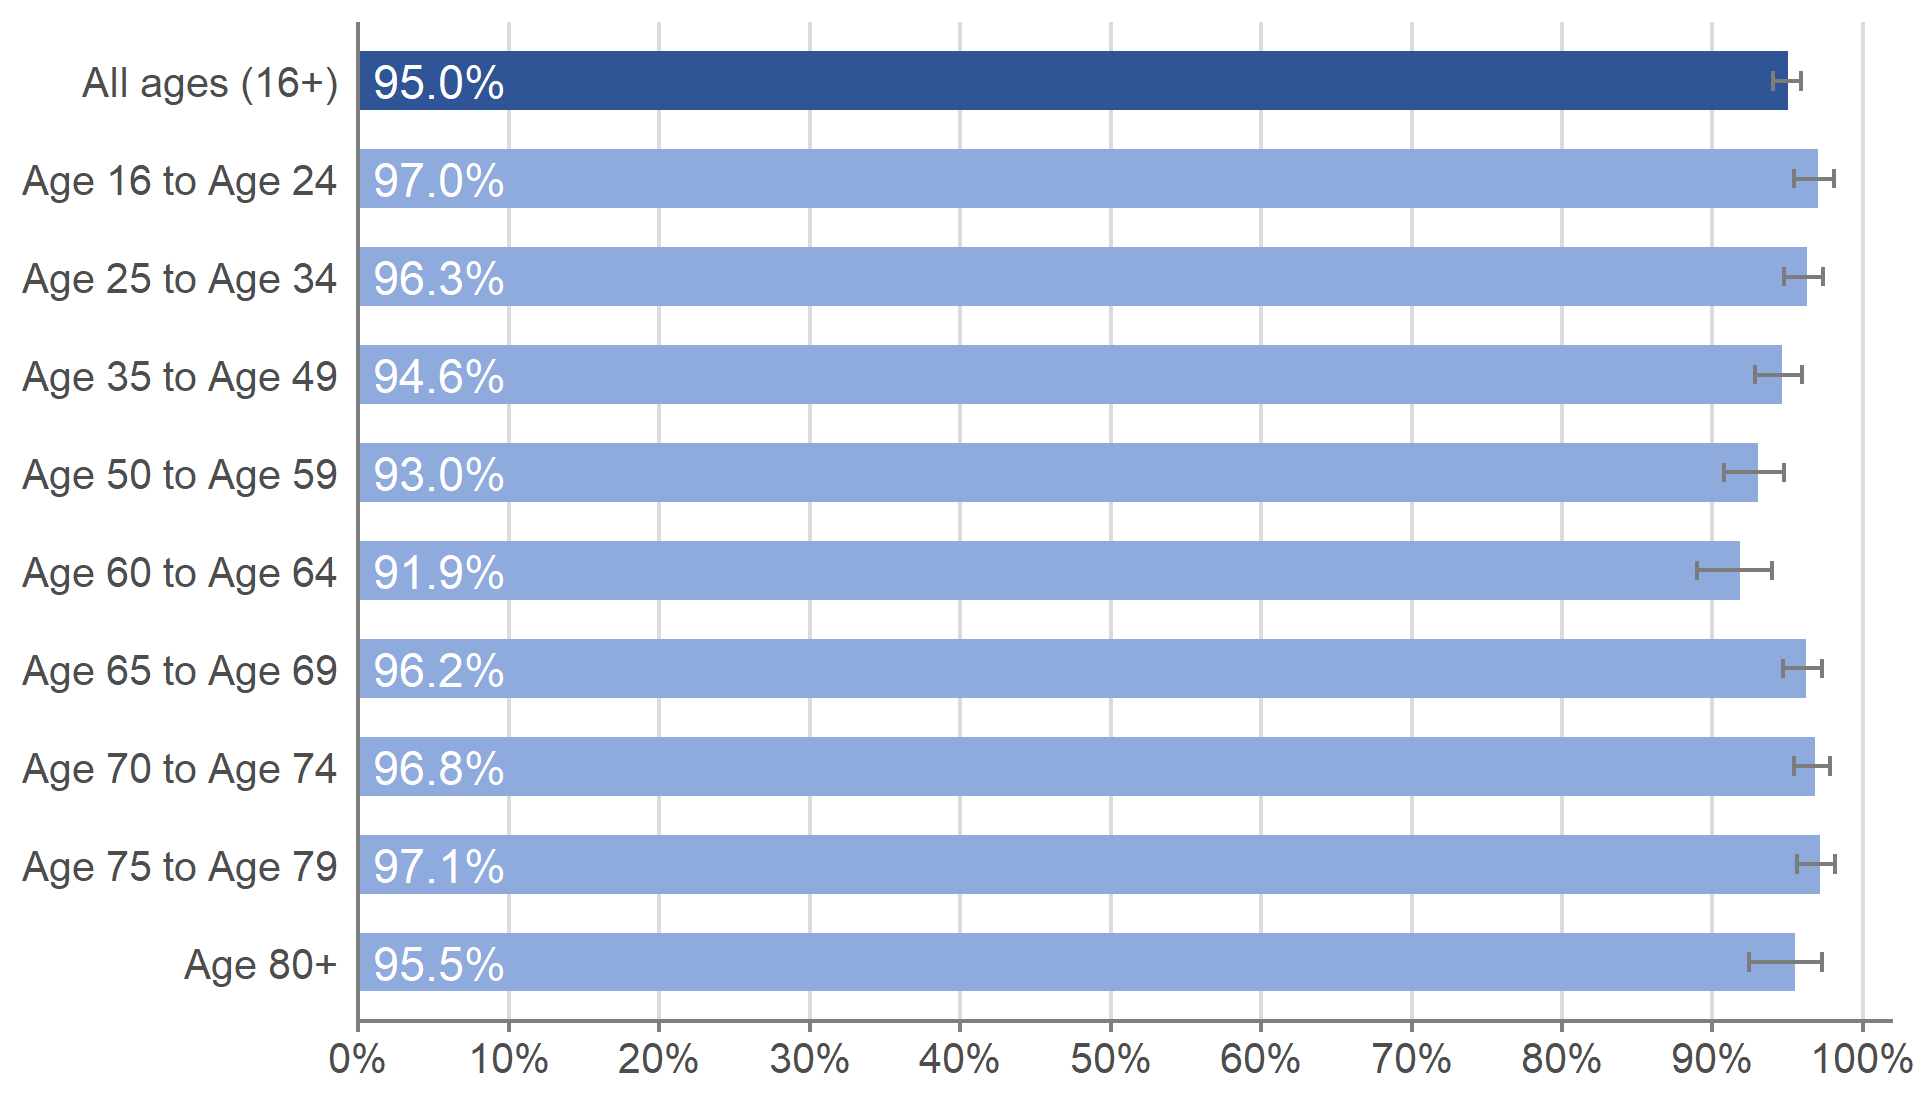 This chart shows the modelled weekly estimate of the percentage of adults living in private residential households testing positive for antibodies to SARS-CoV-2 in the week beginning 15 November 2021 by age group including credible intervals.   The percentage of adults aged 16 to 24 testing positive for antibodies was 97.0% (95% credible interval: 95.4% to 98.1%). The percentage testing positive for antibodies in those aged 25 and over ranged from 91.9% to 97.1%; the highest percentage of people testing positive for antibodies was in those aged 75 to 79 at 97.1% (95% credible interval: 95.6% to 98.1%), followed by those aged 16 to 24.